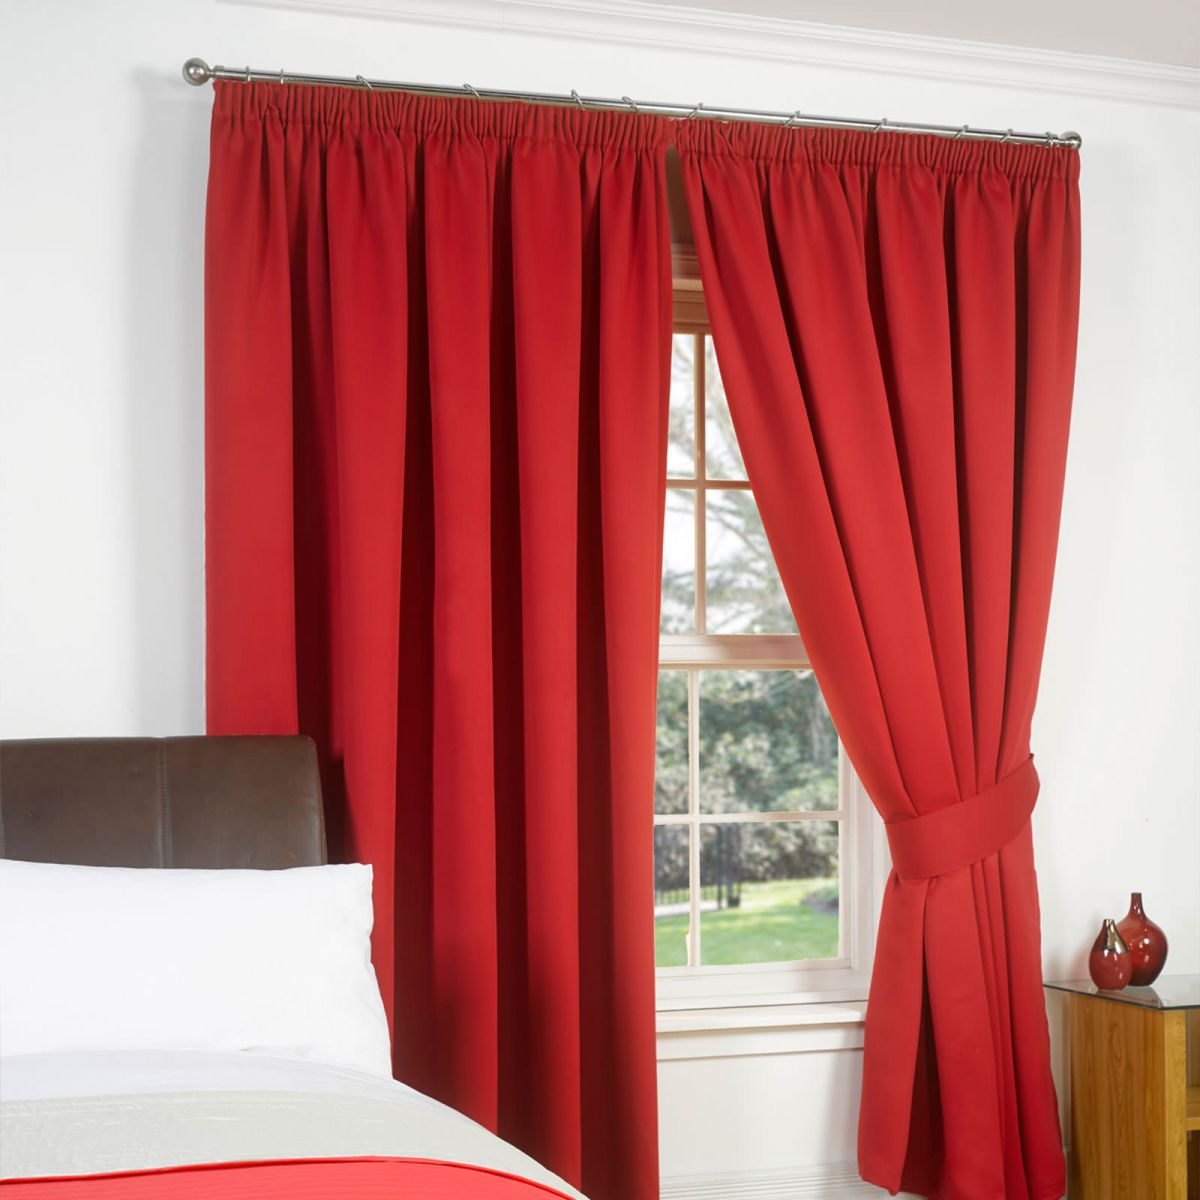 Pencil Pleat Thermal Blackout Curtains - Red 66x72